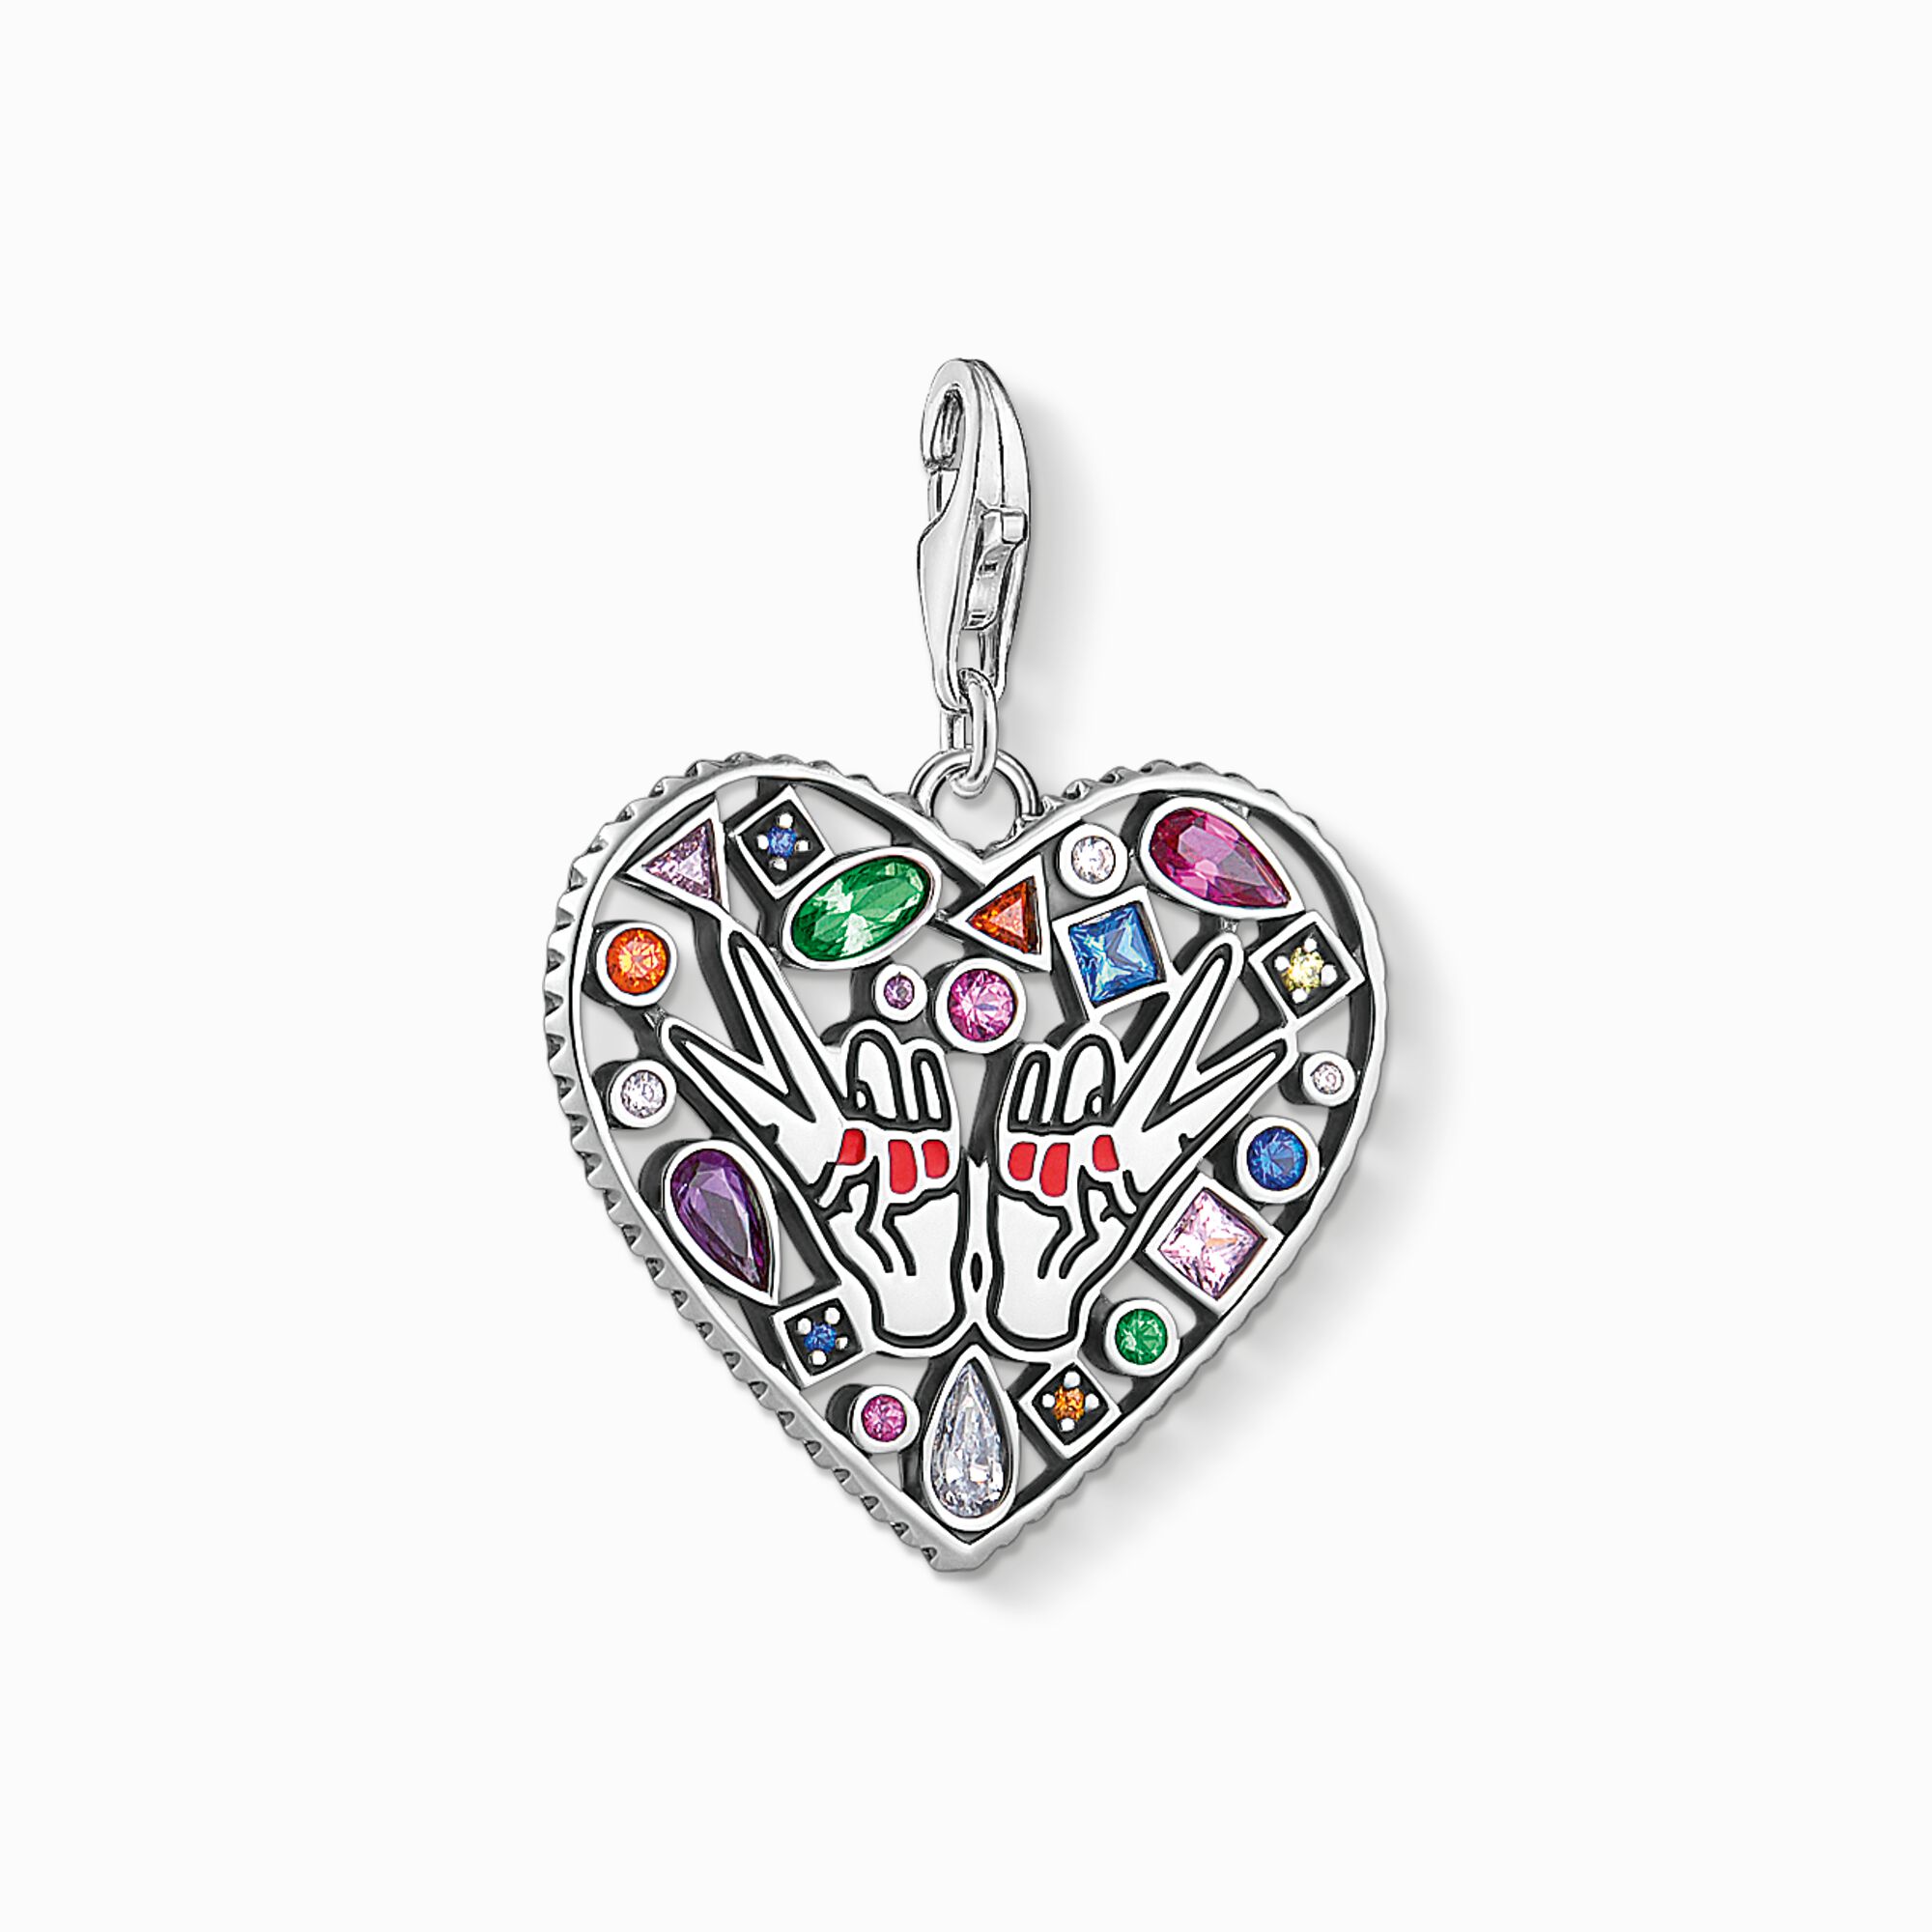 Charm pendant love from the Charm Club collection in the THOMAS SABO online store